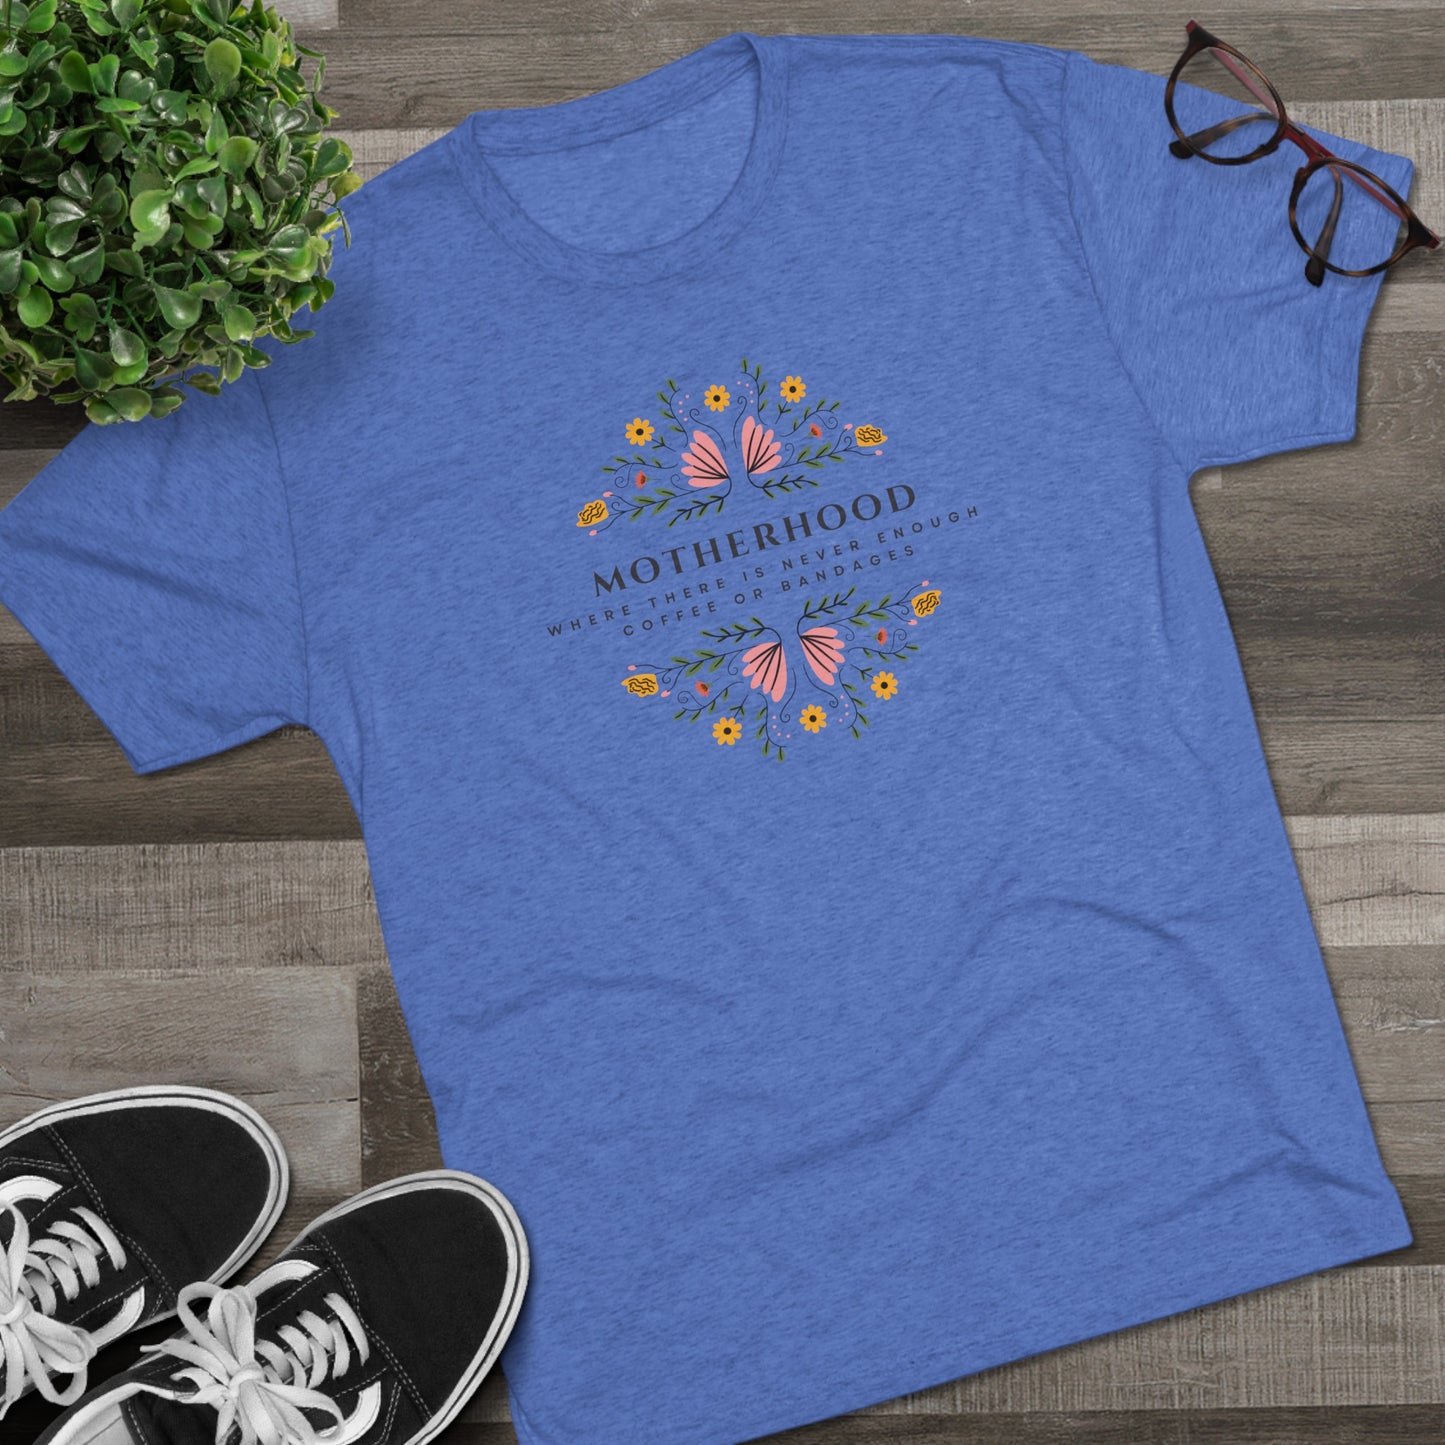 Motherhood: Where there is never enough coffee or bandages Tri-Blend Crew Tee